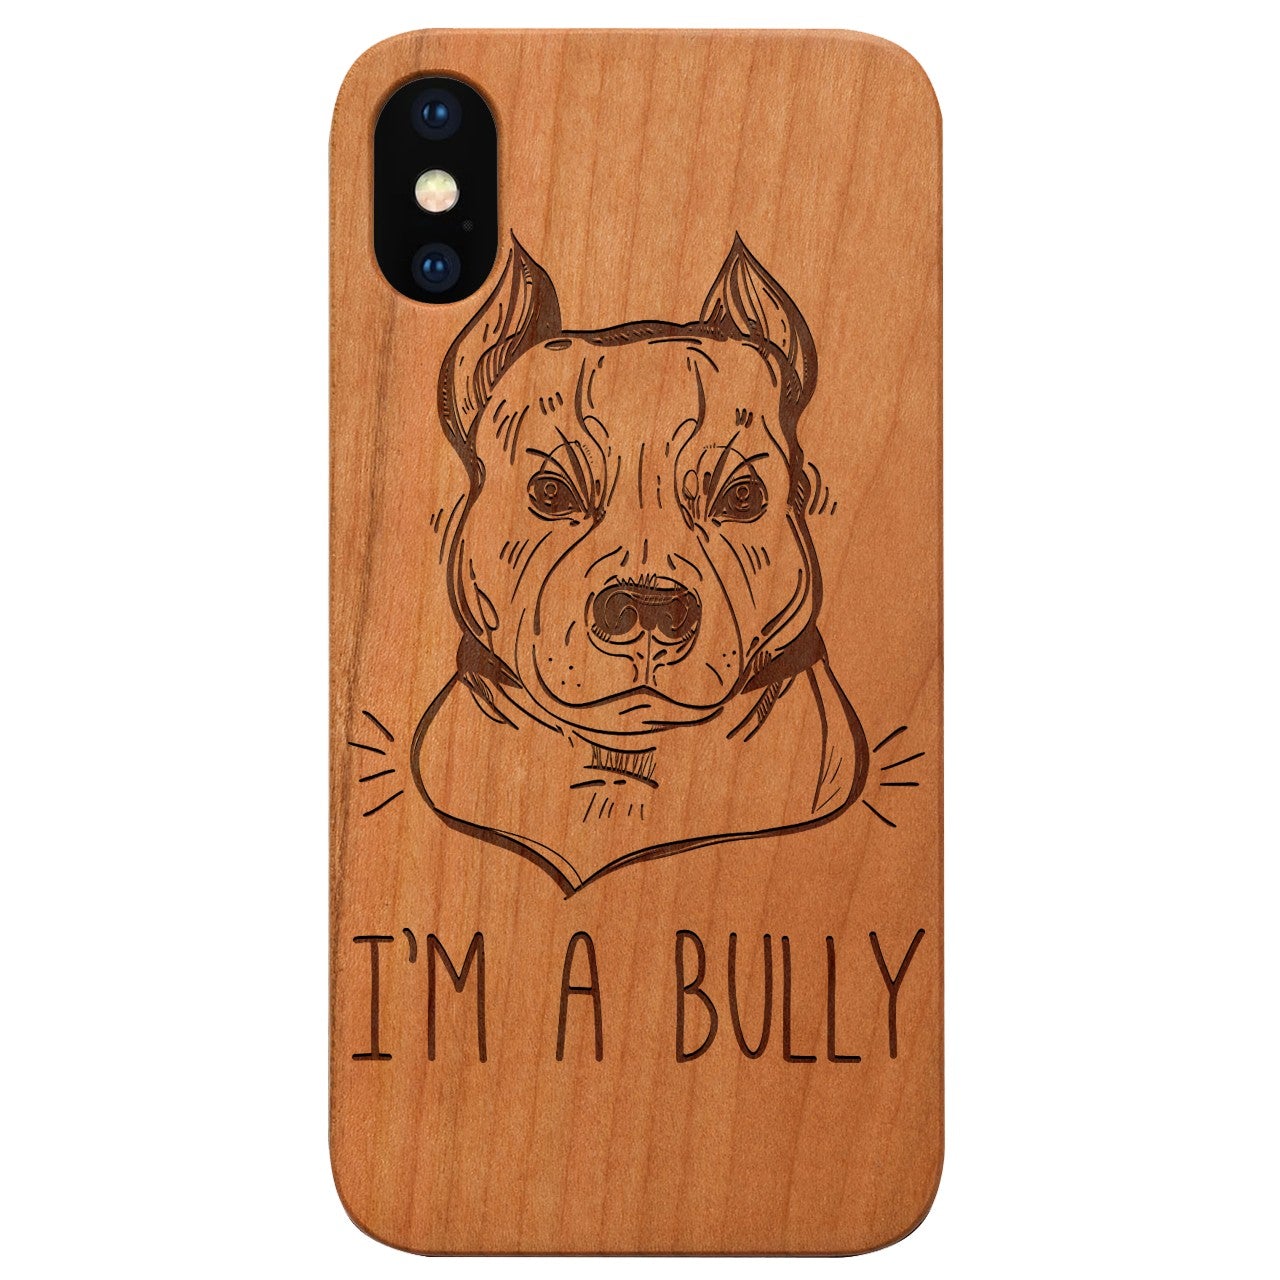  Bully - Engraved - Wooden Phone Case - IPhone 13 Models